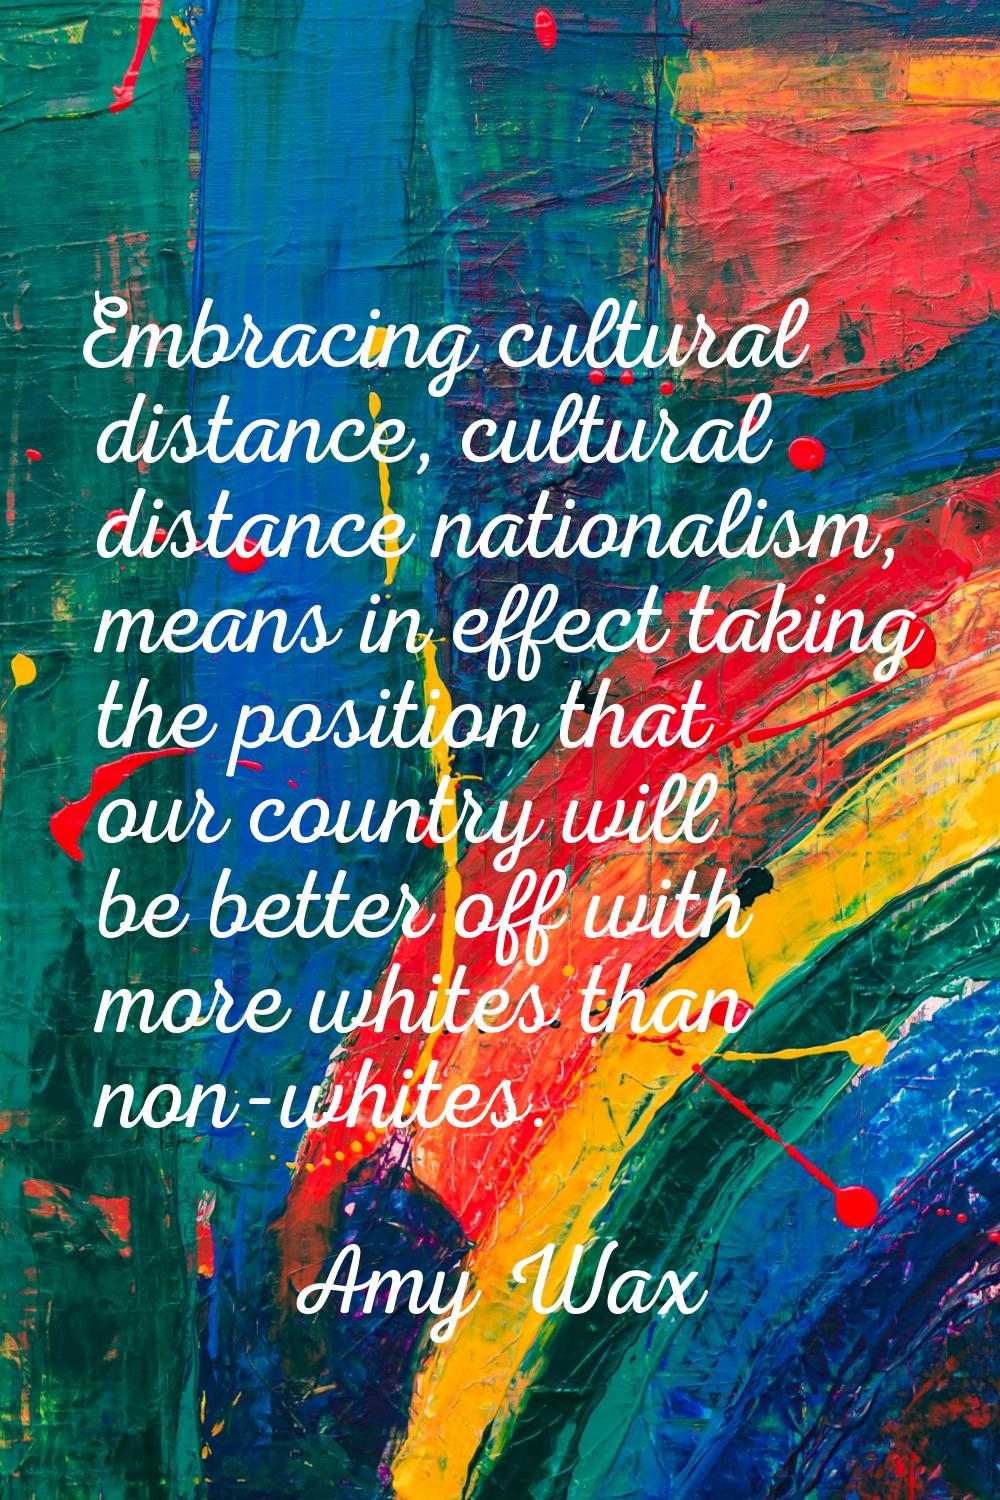 Embracing cultural distance, cultural distance nationalism, means in effect taking the position tha